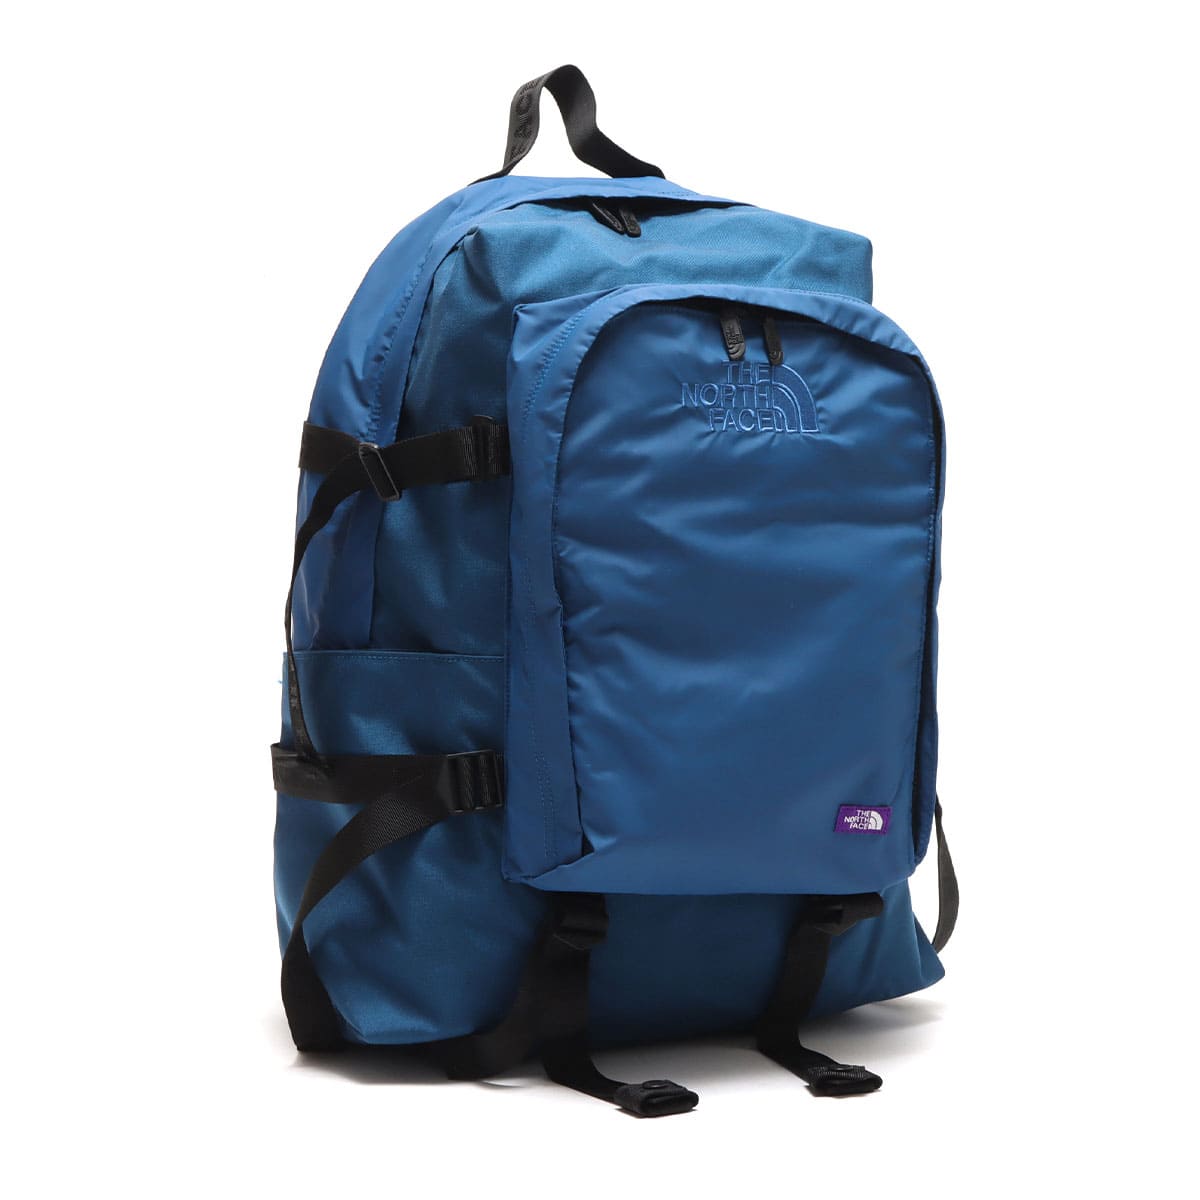 THE NORTH FACE PURPLE LABEL CORDURA Nylon Day Pack TEAL Blue 22SS-I